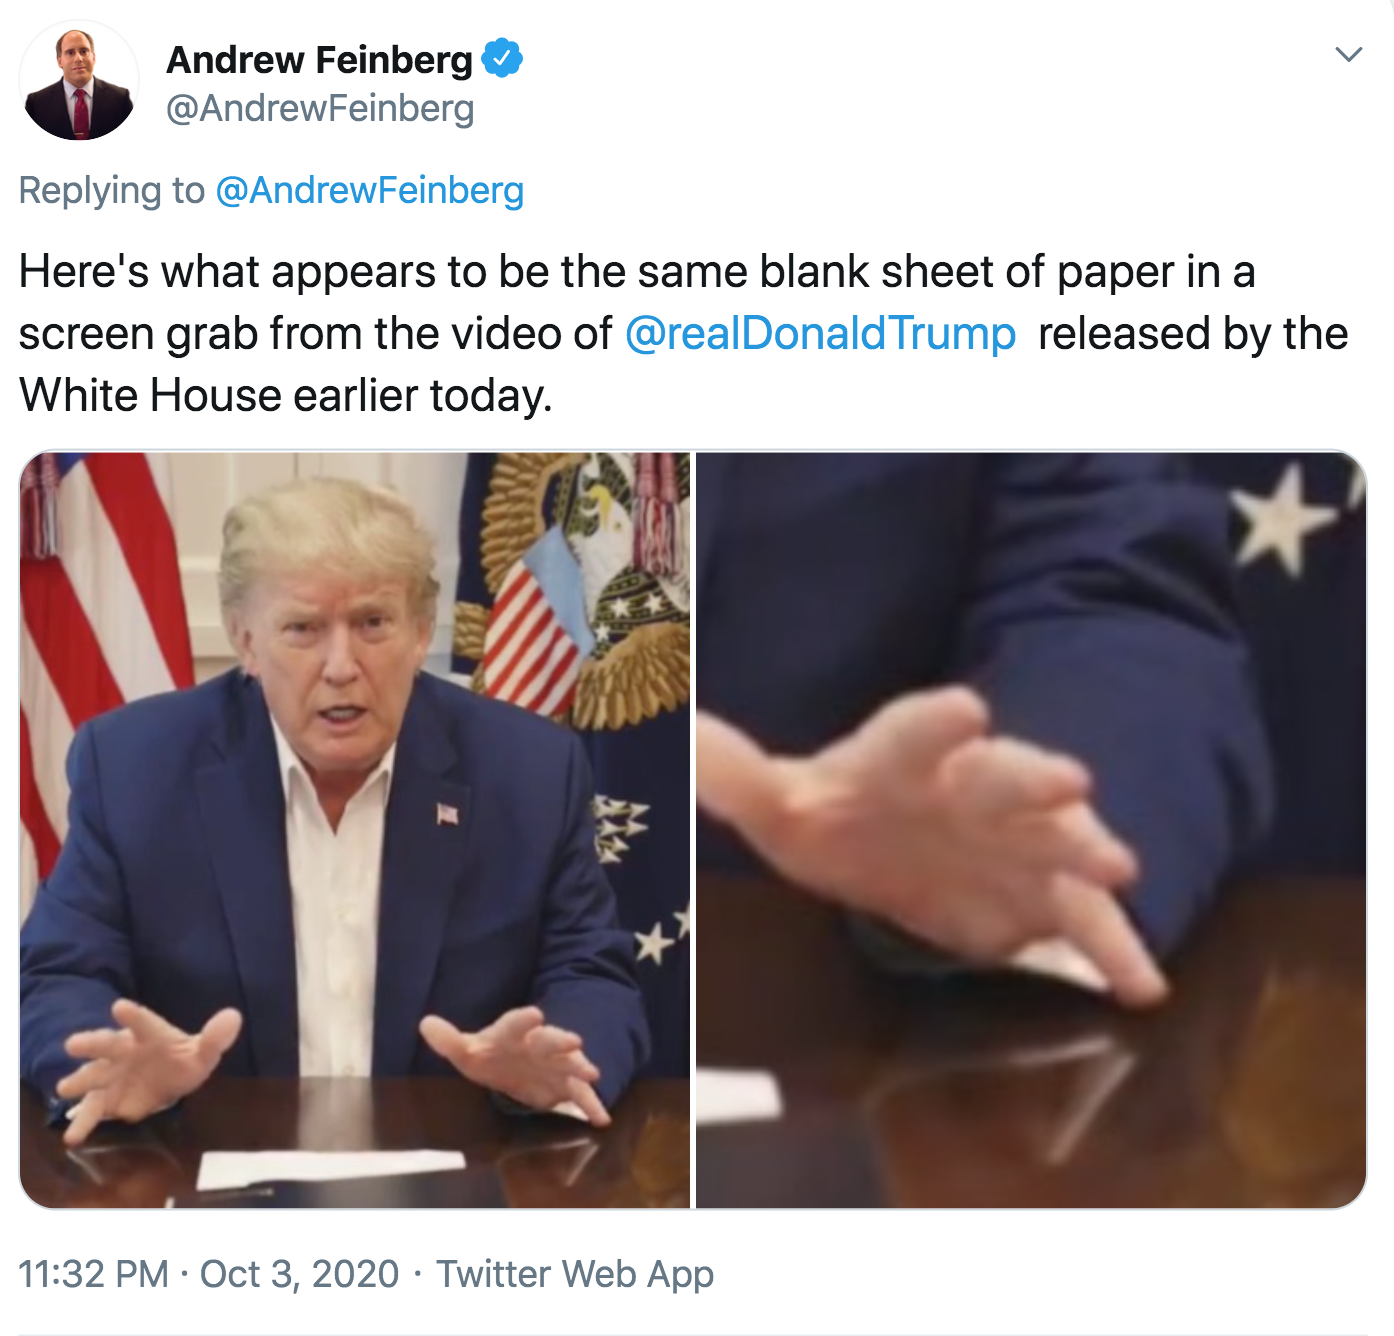 presentation - Andrew Feinberg Here's what appears to be the same blank sheet of paper in a screen grab from the video of Trump released by the White House earlier today. . Twitter Web App